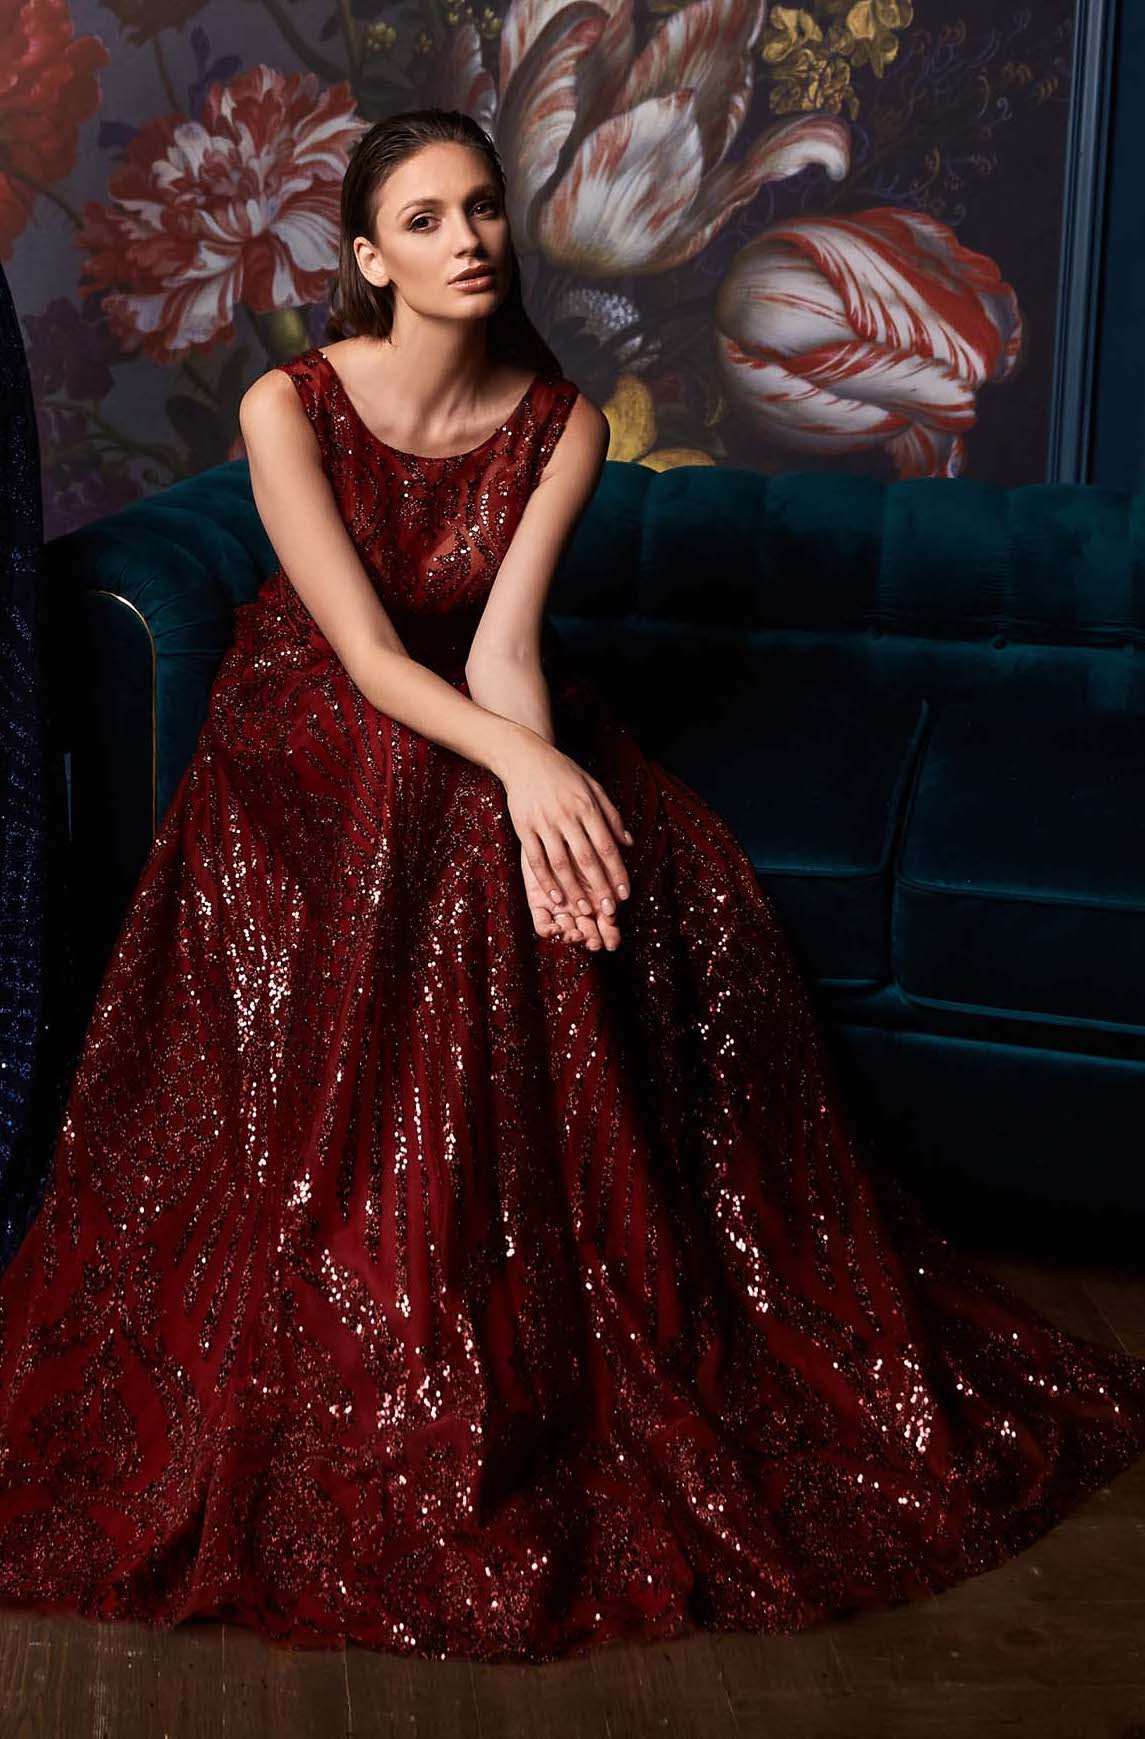 Unique One Shoulder Cut-outs Red Sequin Prom Dress - Xdressy